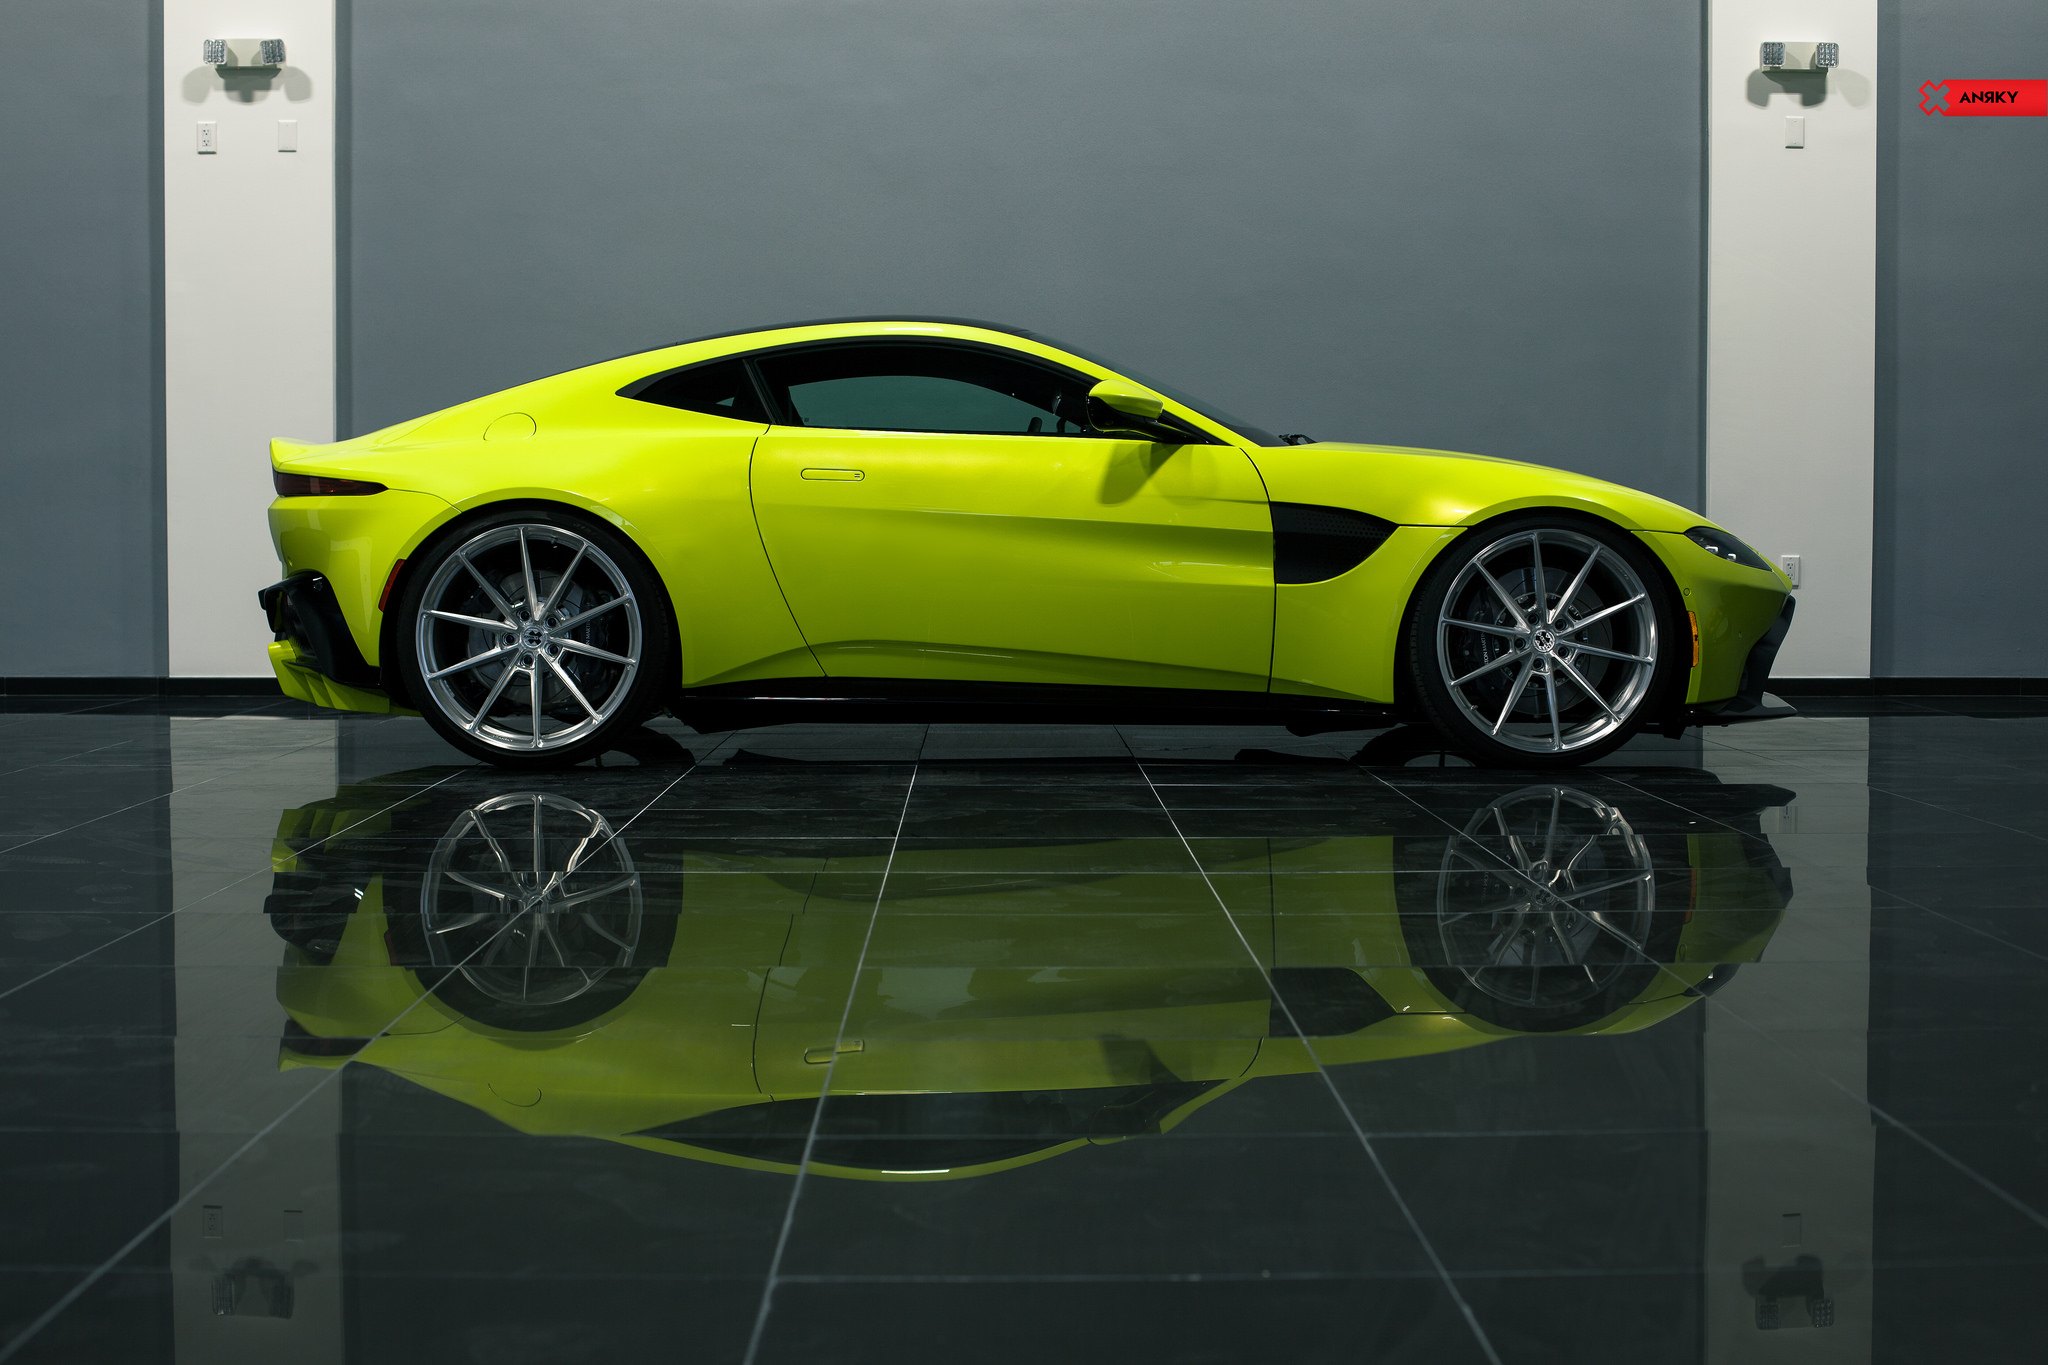 Aftermarket Side Skirts on Lime Green Aston Martin Vantage - Photo by ANRKY Wheels